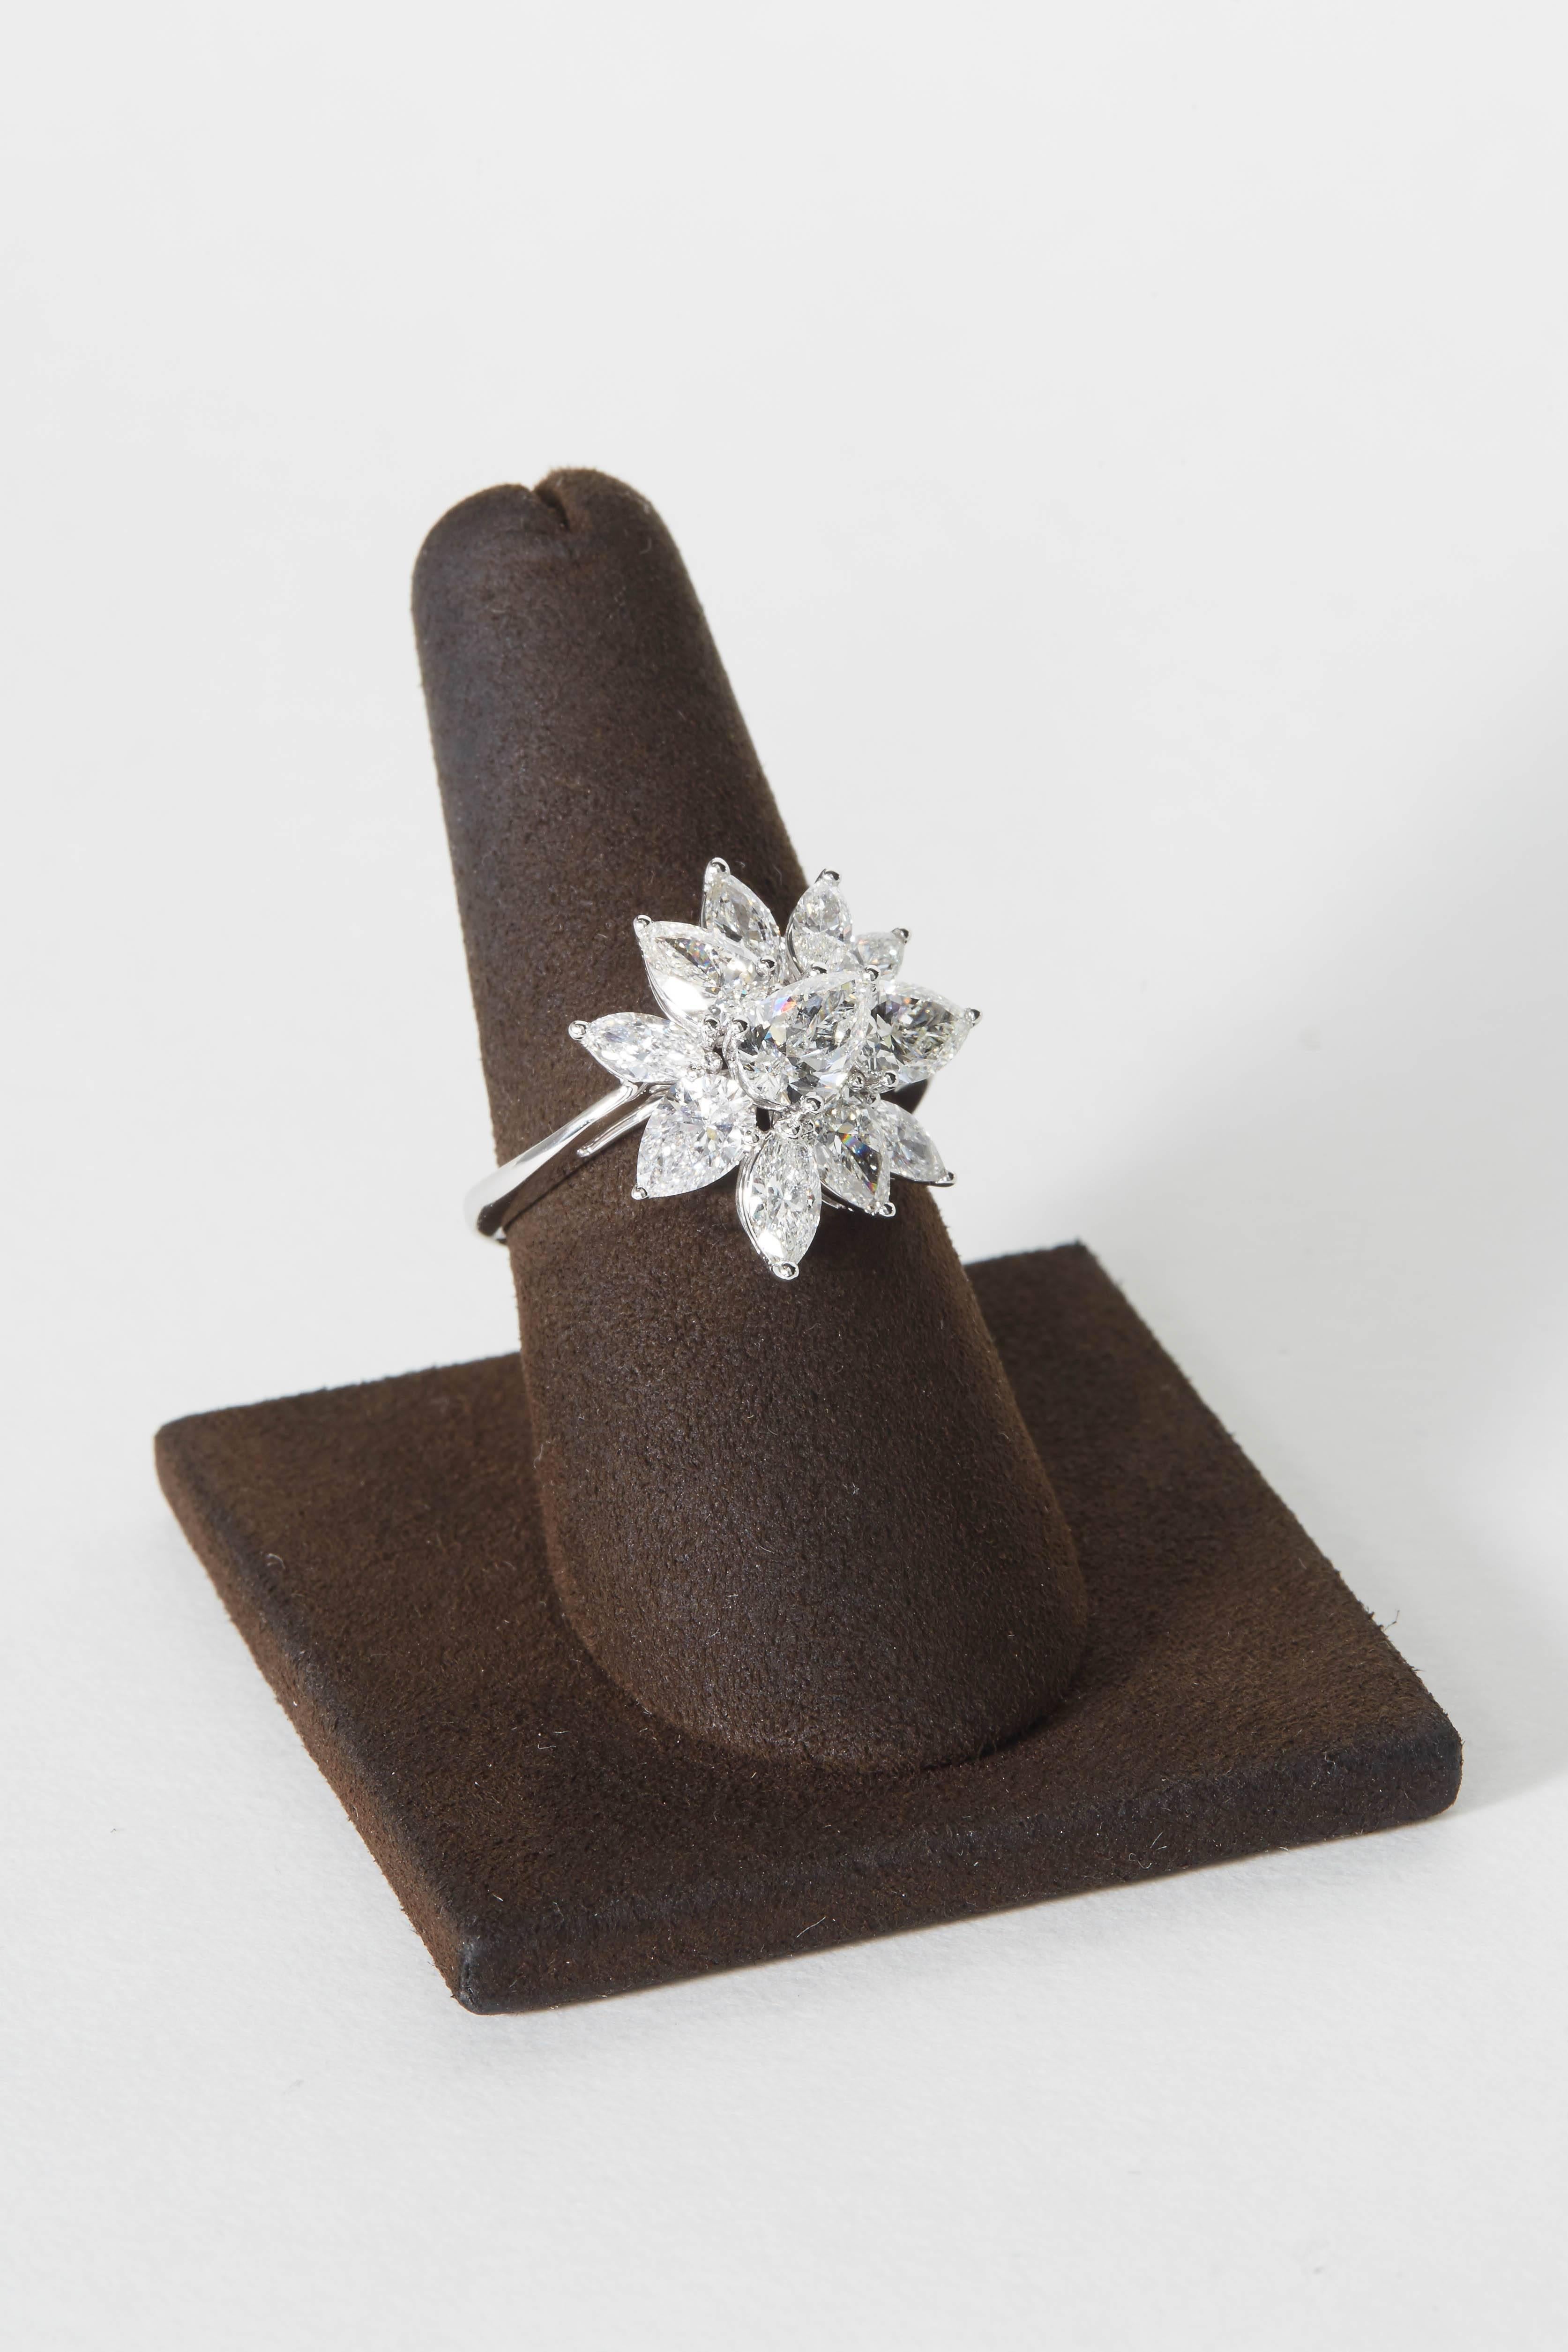 
A beautiful design, so much sparkle!!

This cluster ring can be worn with a pair of cluster earrings or to complete a wreathe necklace and earring set. It is stunning on its own as well!

3.75 carats of white VS pear shape and marquise diamonds set